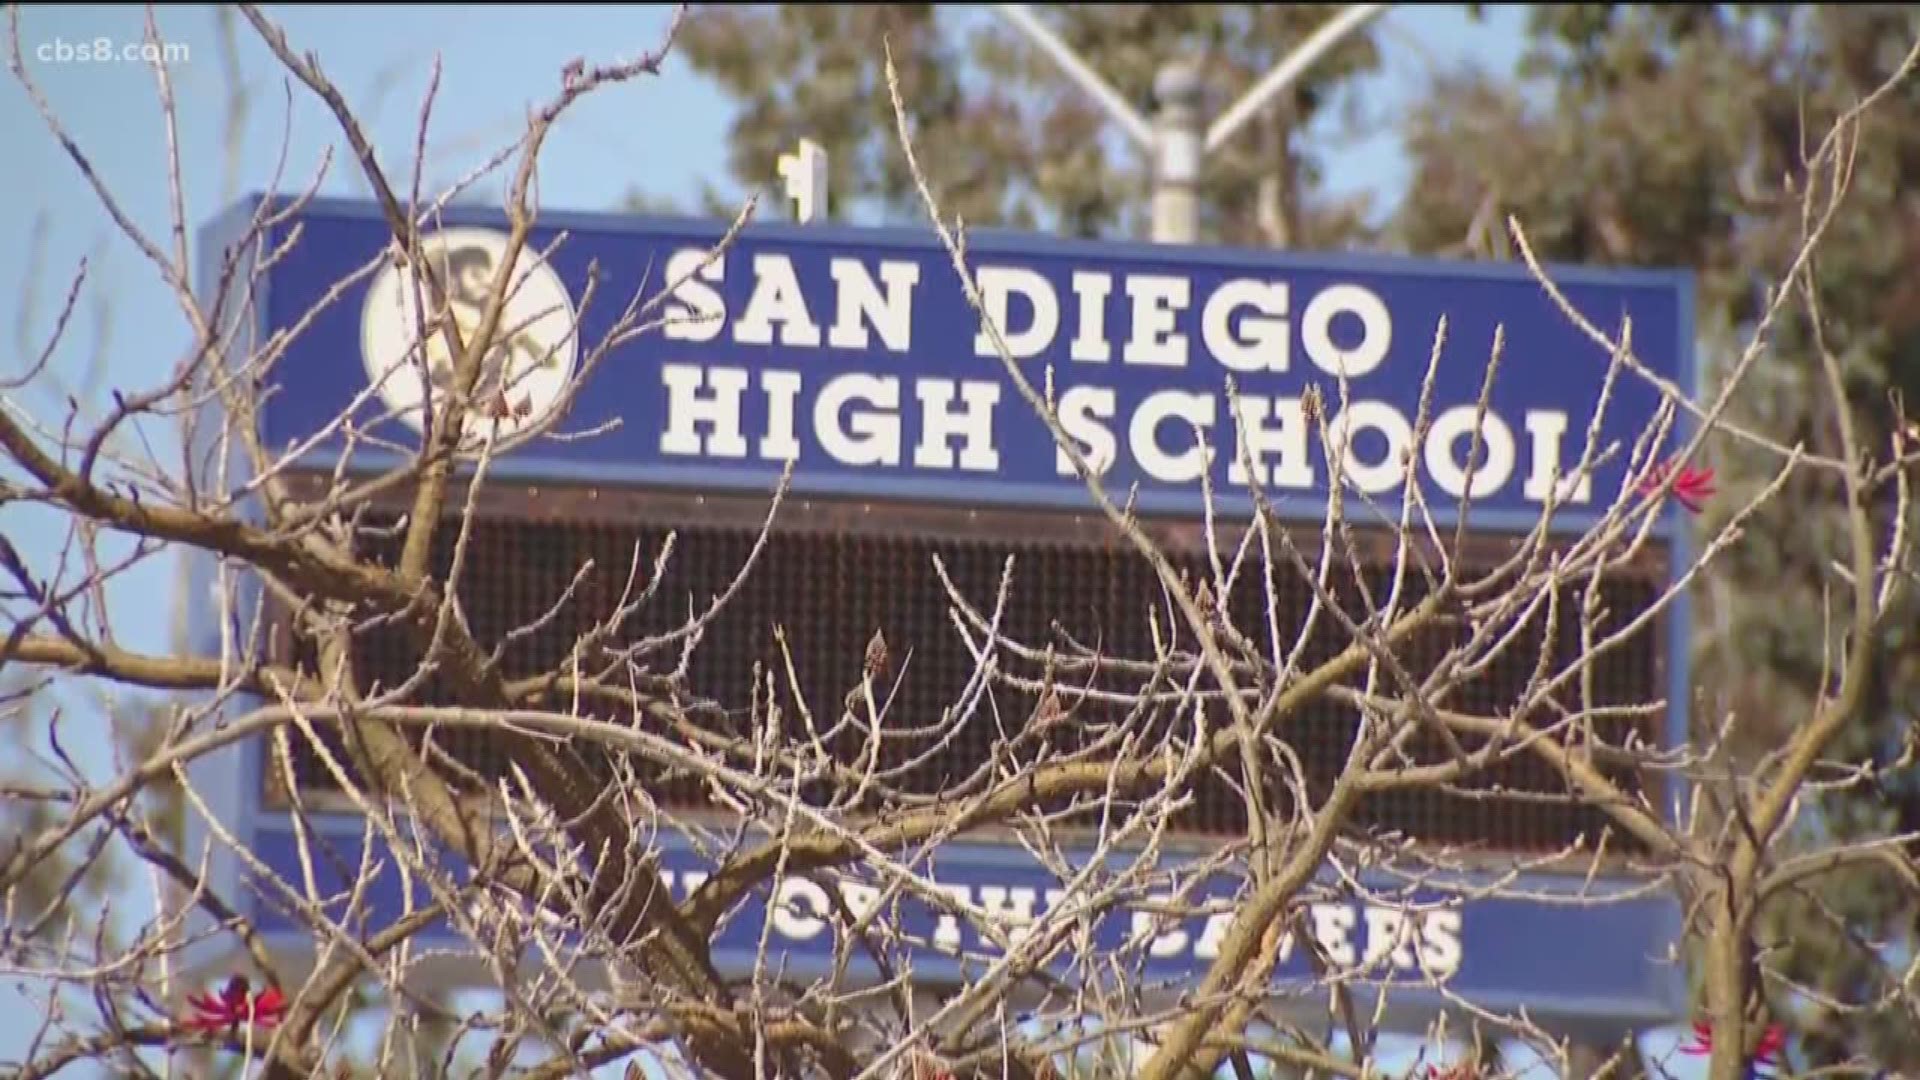 The plaintiff's attorney alleges what happened to her client could have been prevented had San Diego High's leadership heeded warnings from other teachers and staff.